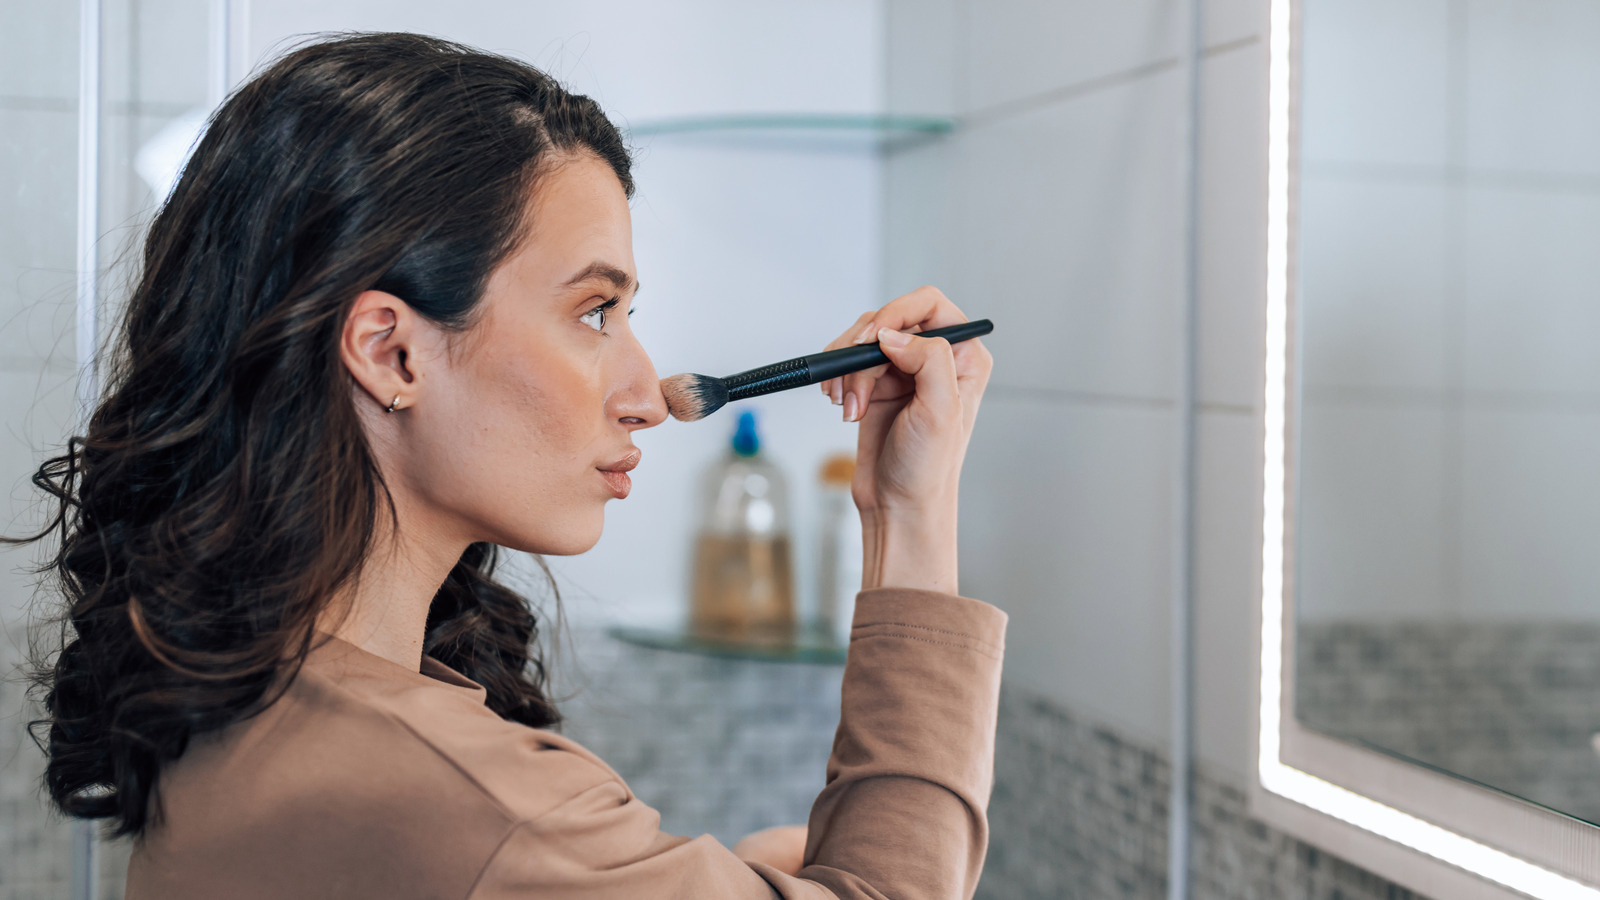 The Contour Hack To Try If You Love The Button Nose Look